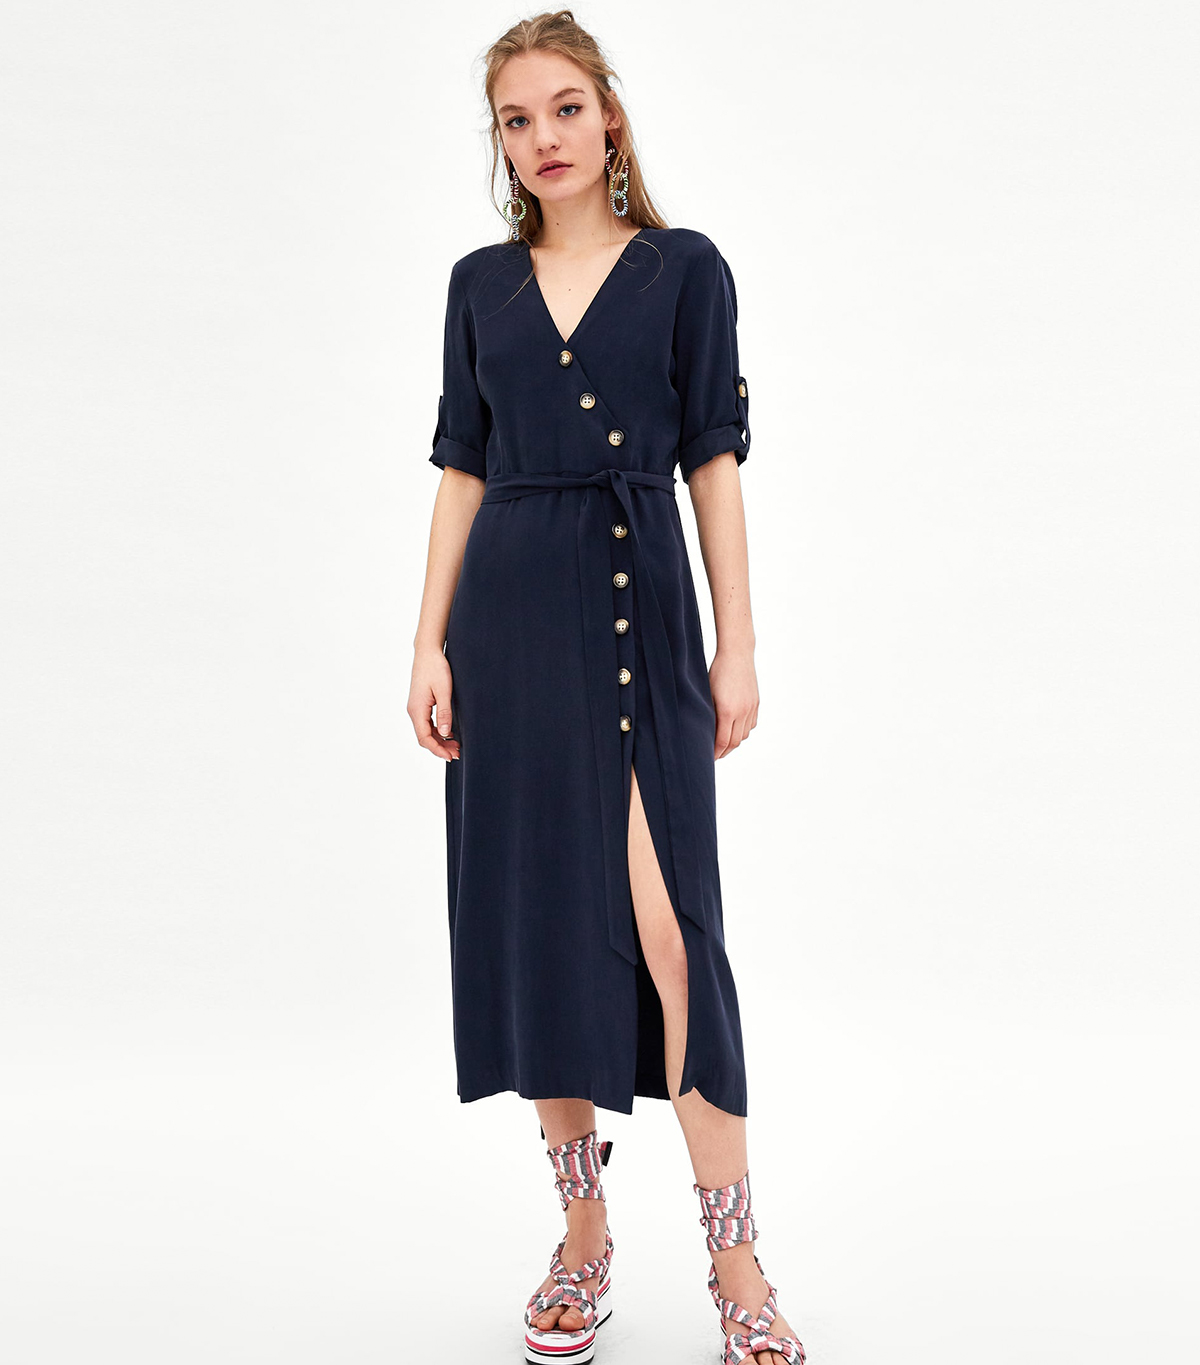 The Very Best Spring Dresses From Zara ...